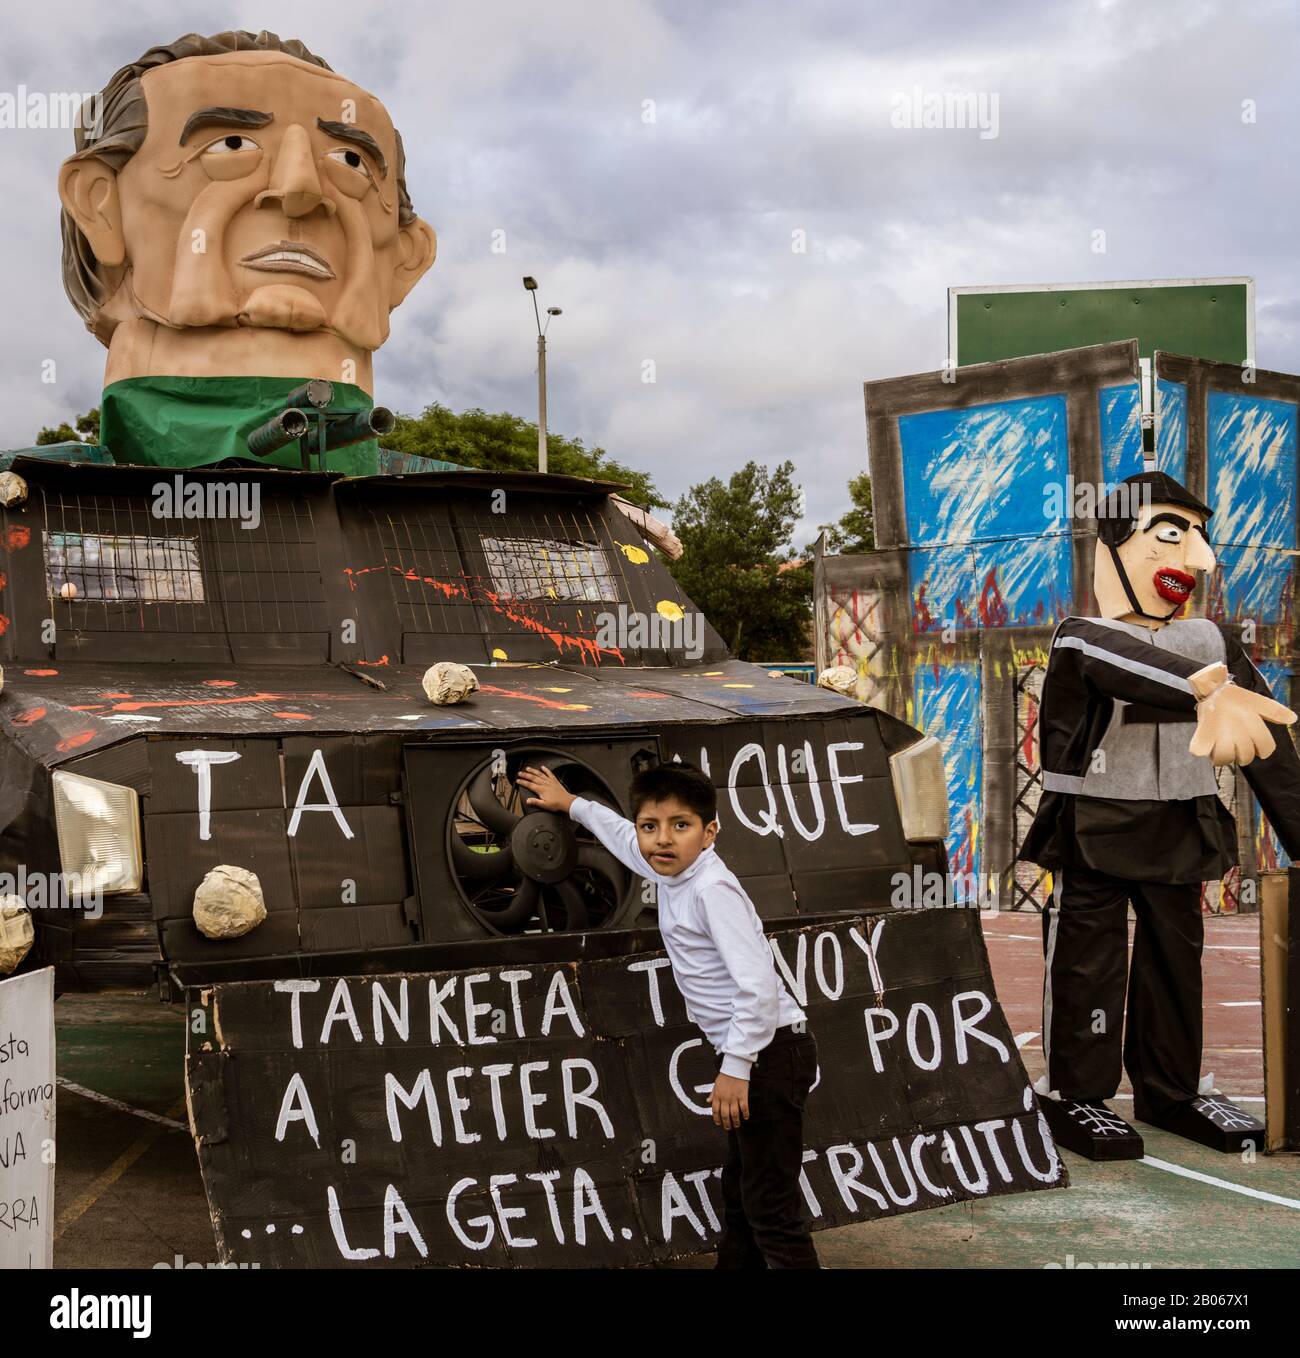 Ecuadorian President Moreno is lampooned in a paper mache float over his attempting to remove gas subsidies Stock Photo